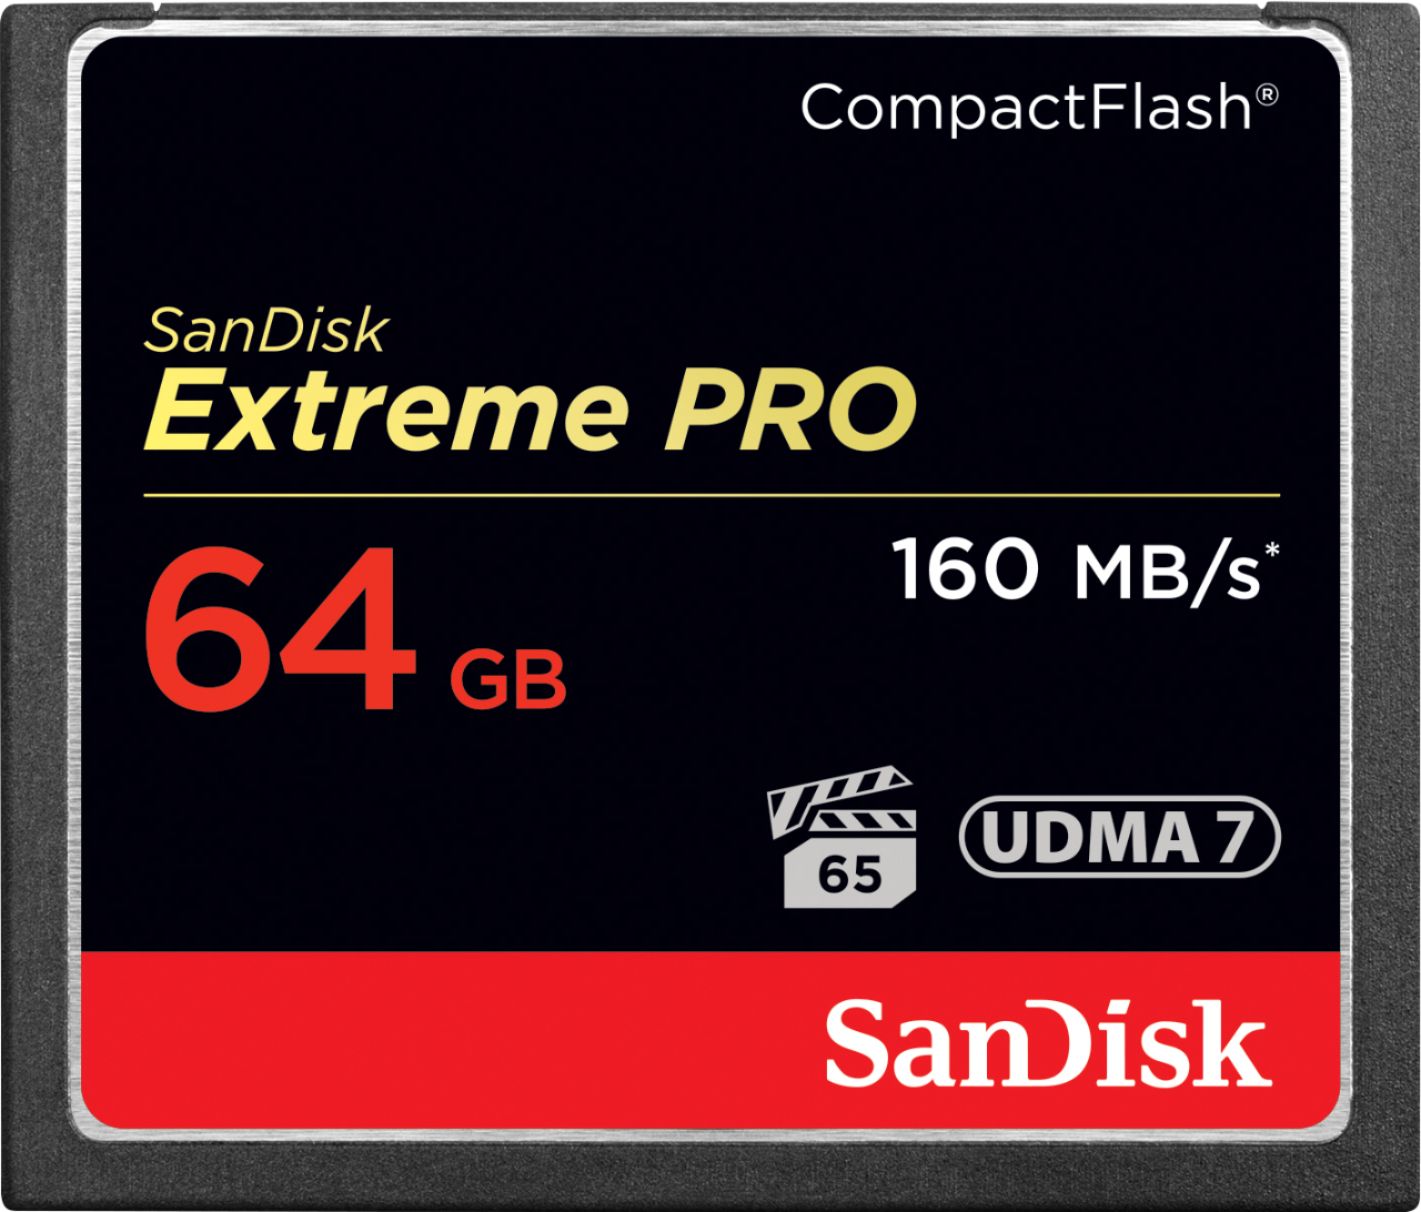 SanDisk - Extreme Pro 64GB CompactFlash Memory Card